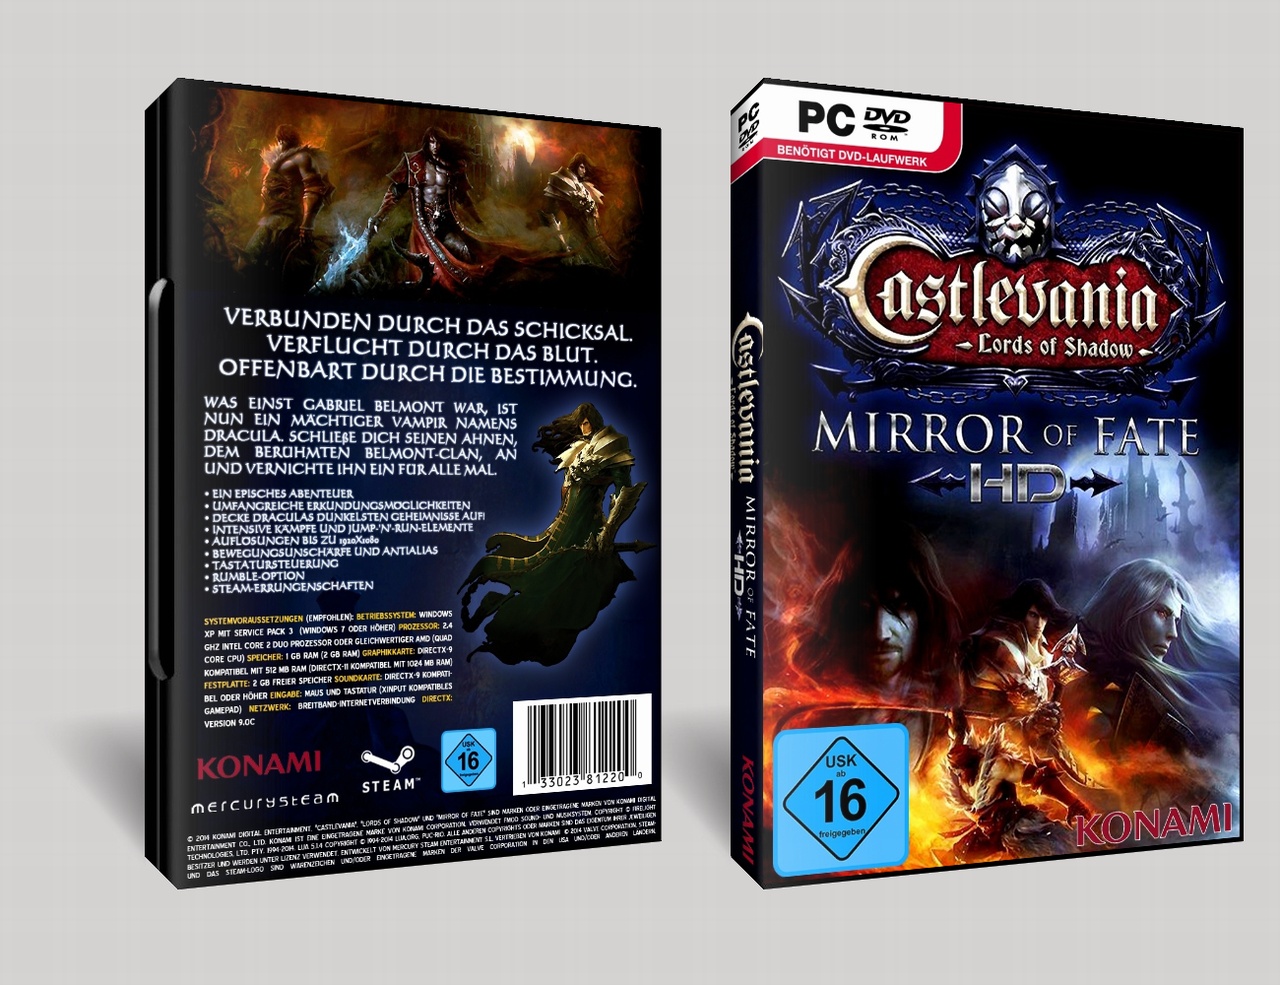 Castlevania: Lords of Shadow: Mirror of Fate box cover